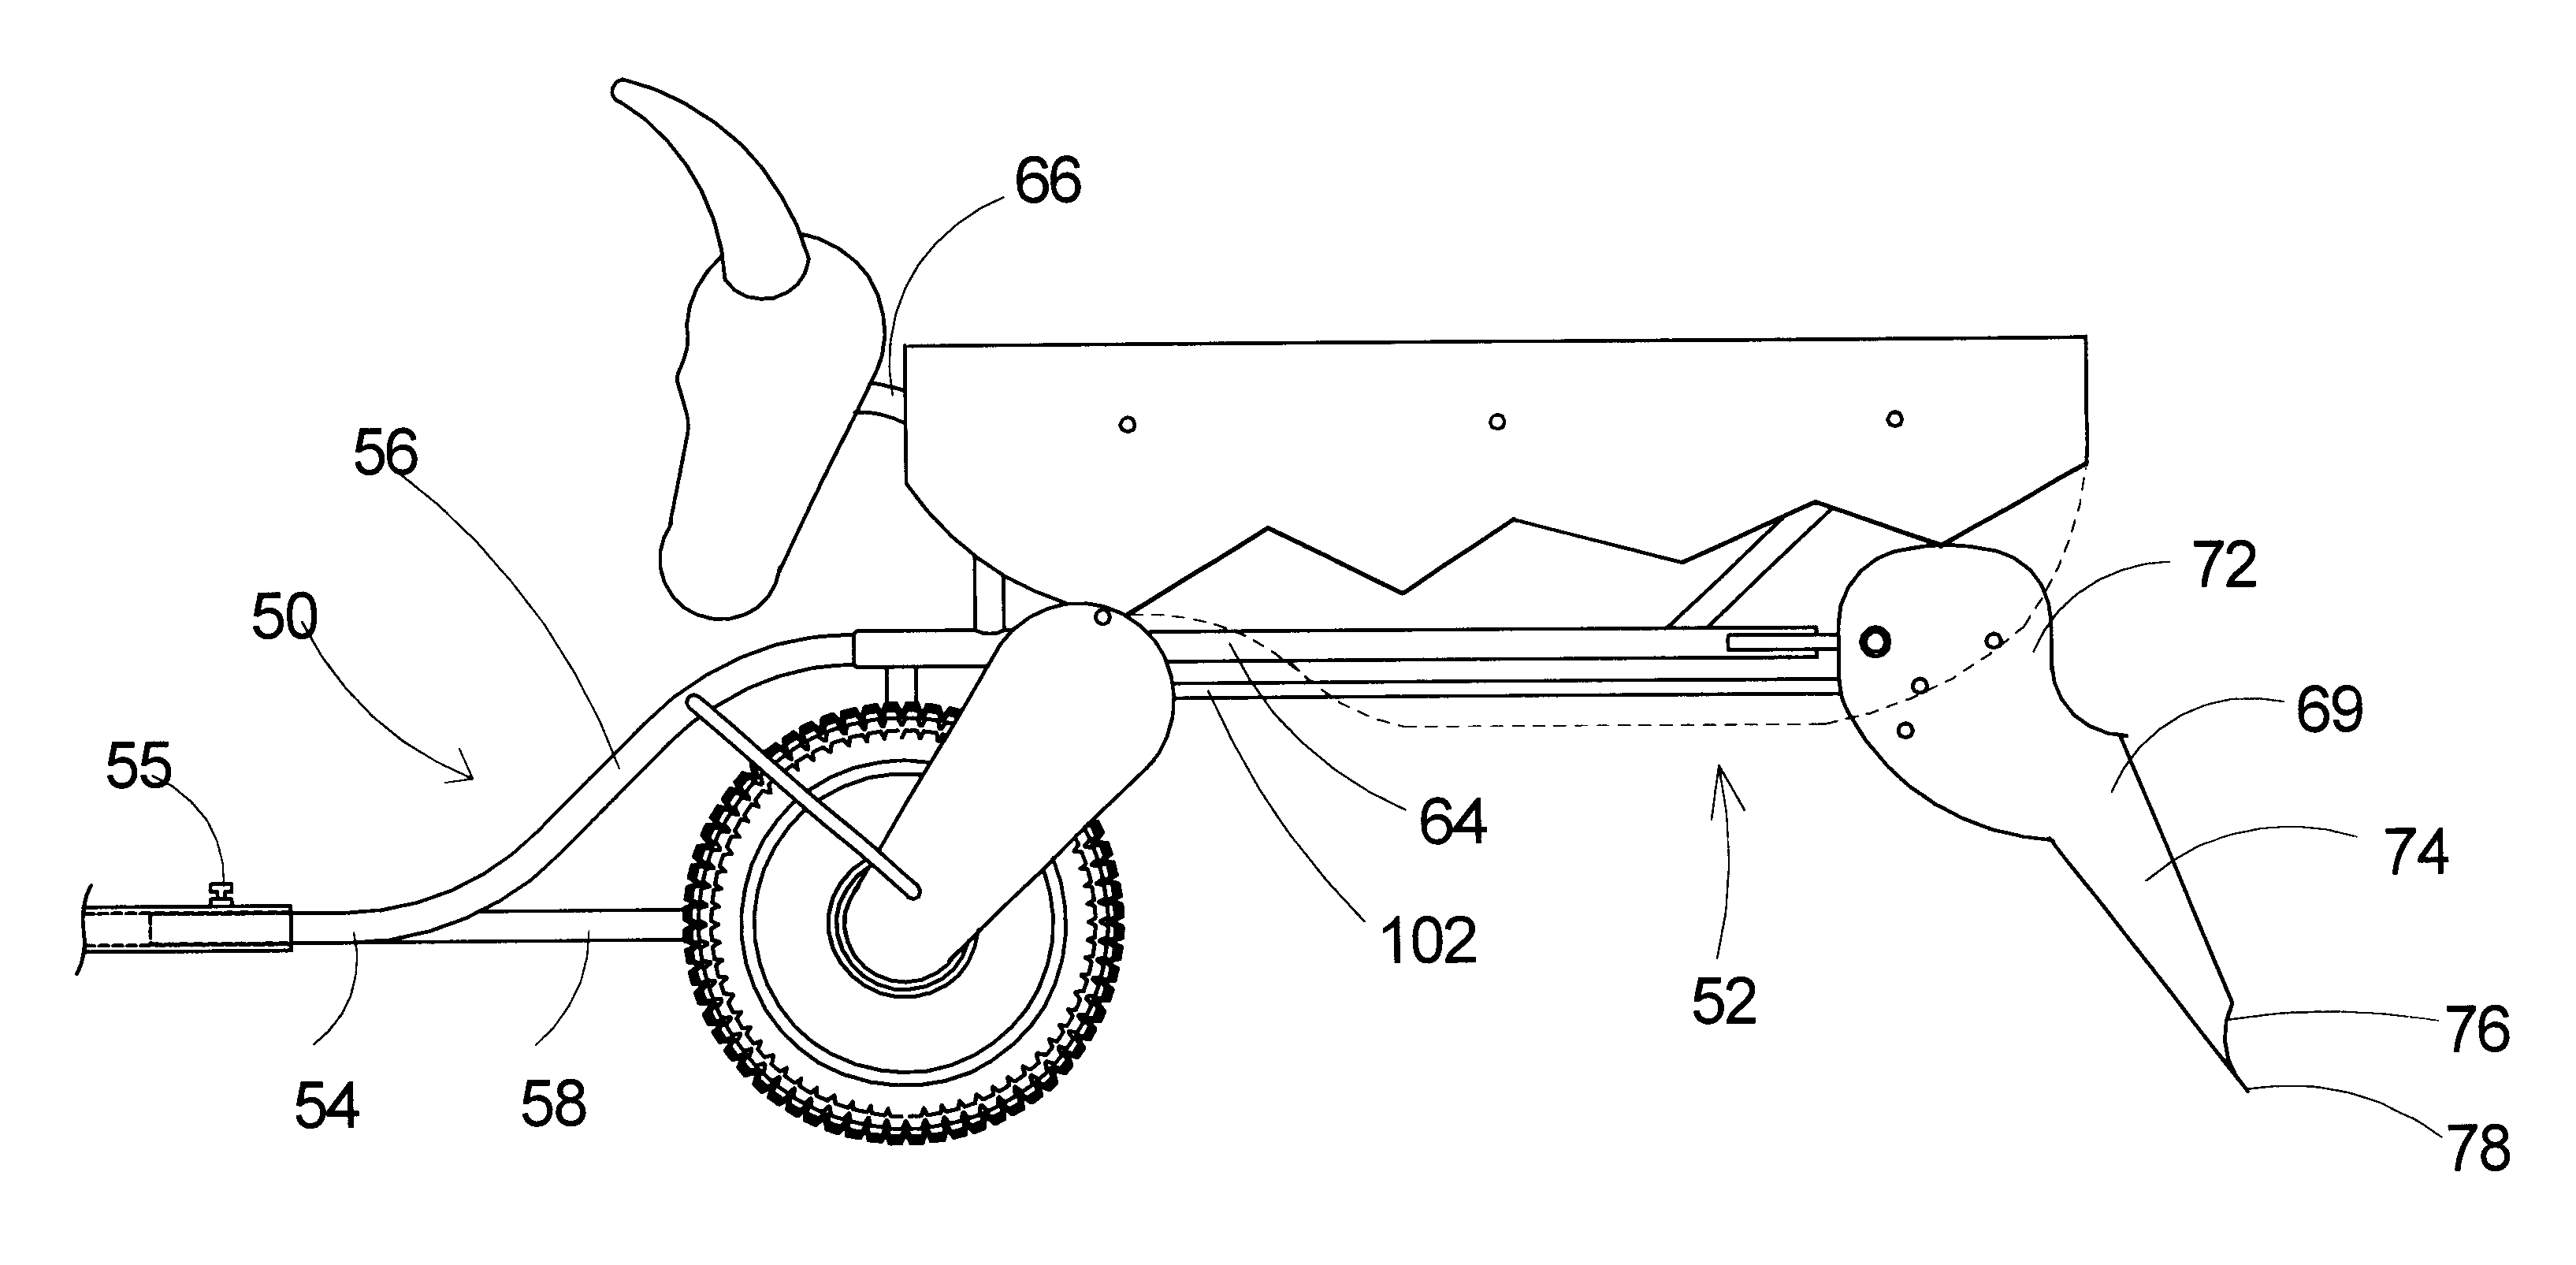 Mechanical roping steer apparatus with enhanced stride simulation